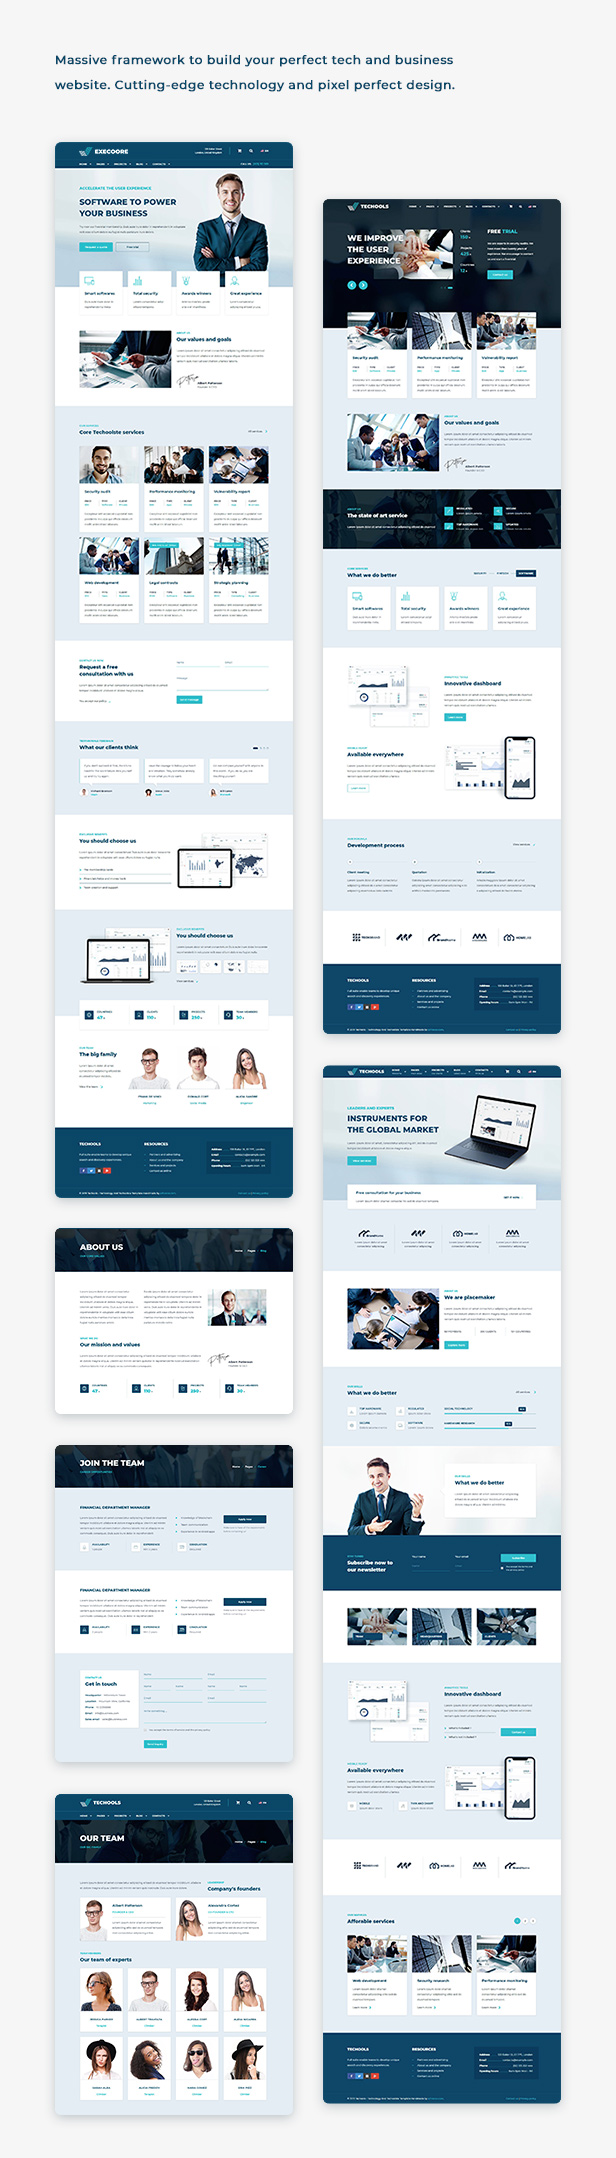 Execoore - Technology And Fintech Template - 2